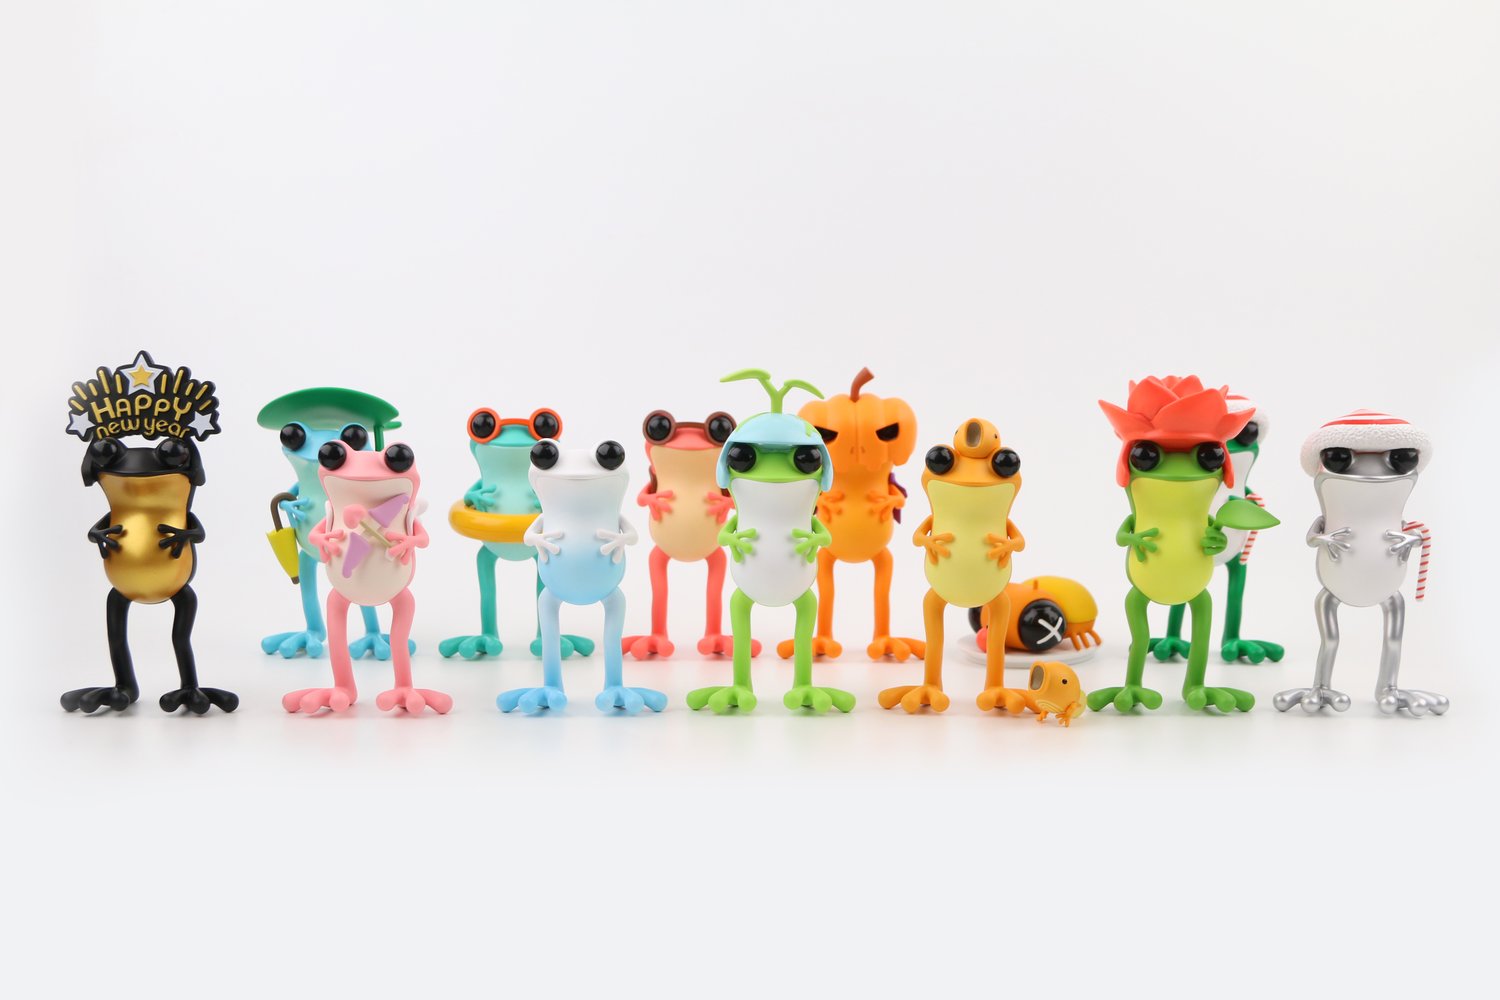 Image of 12months - Blind Box Series